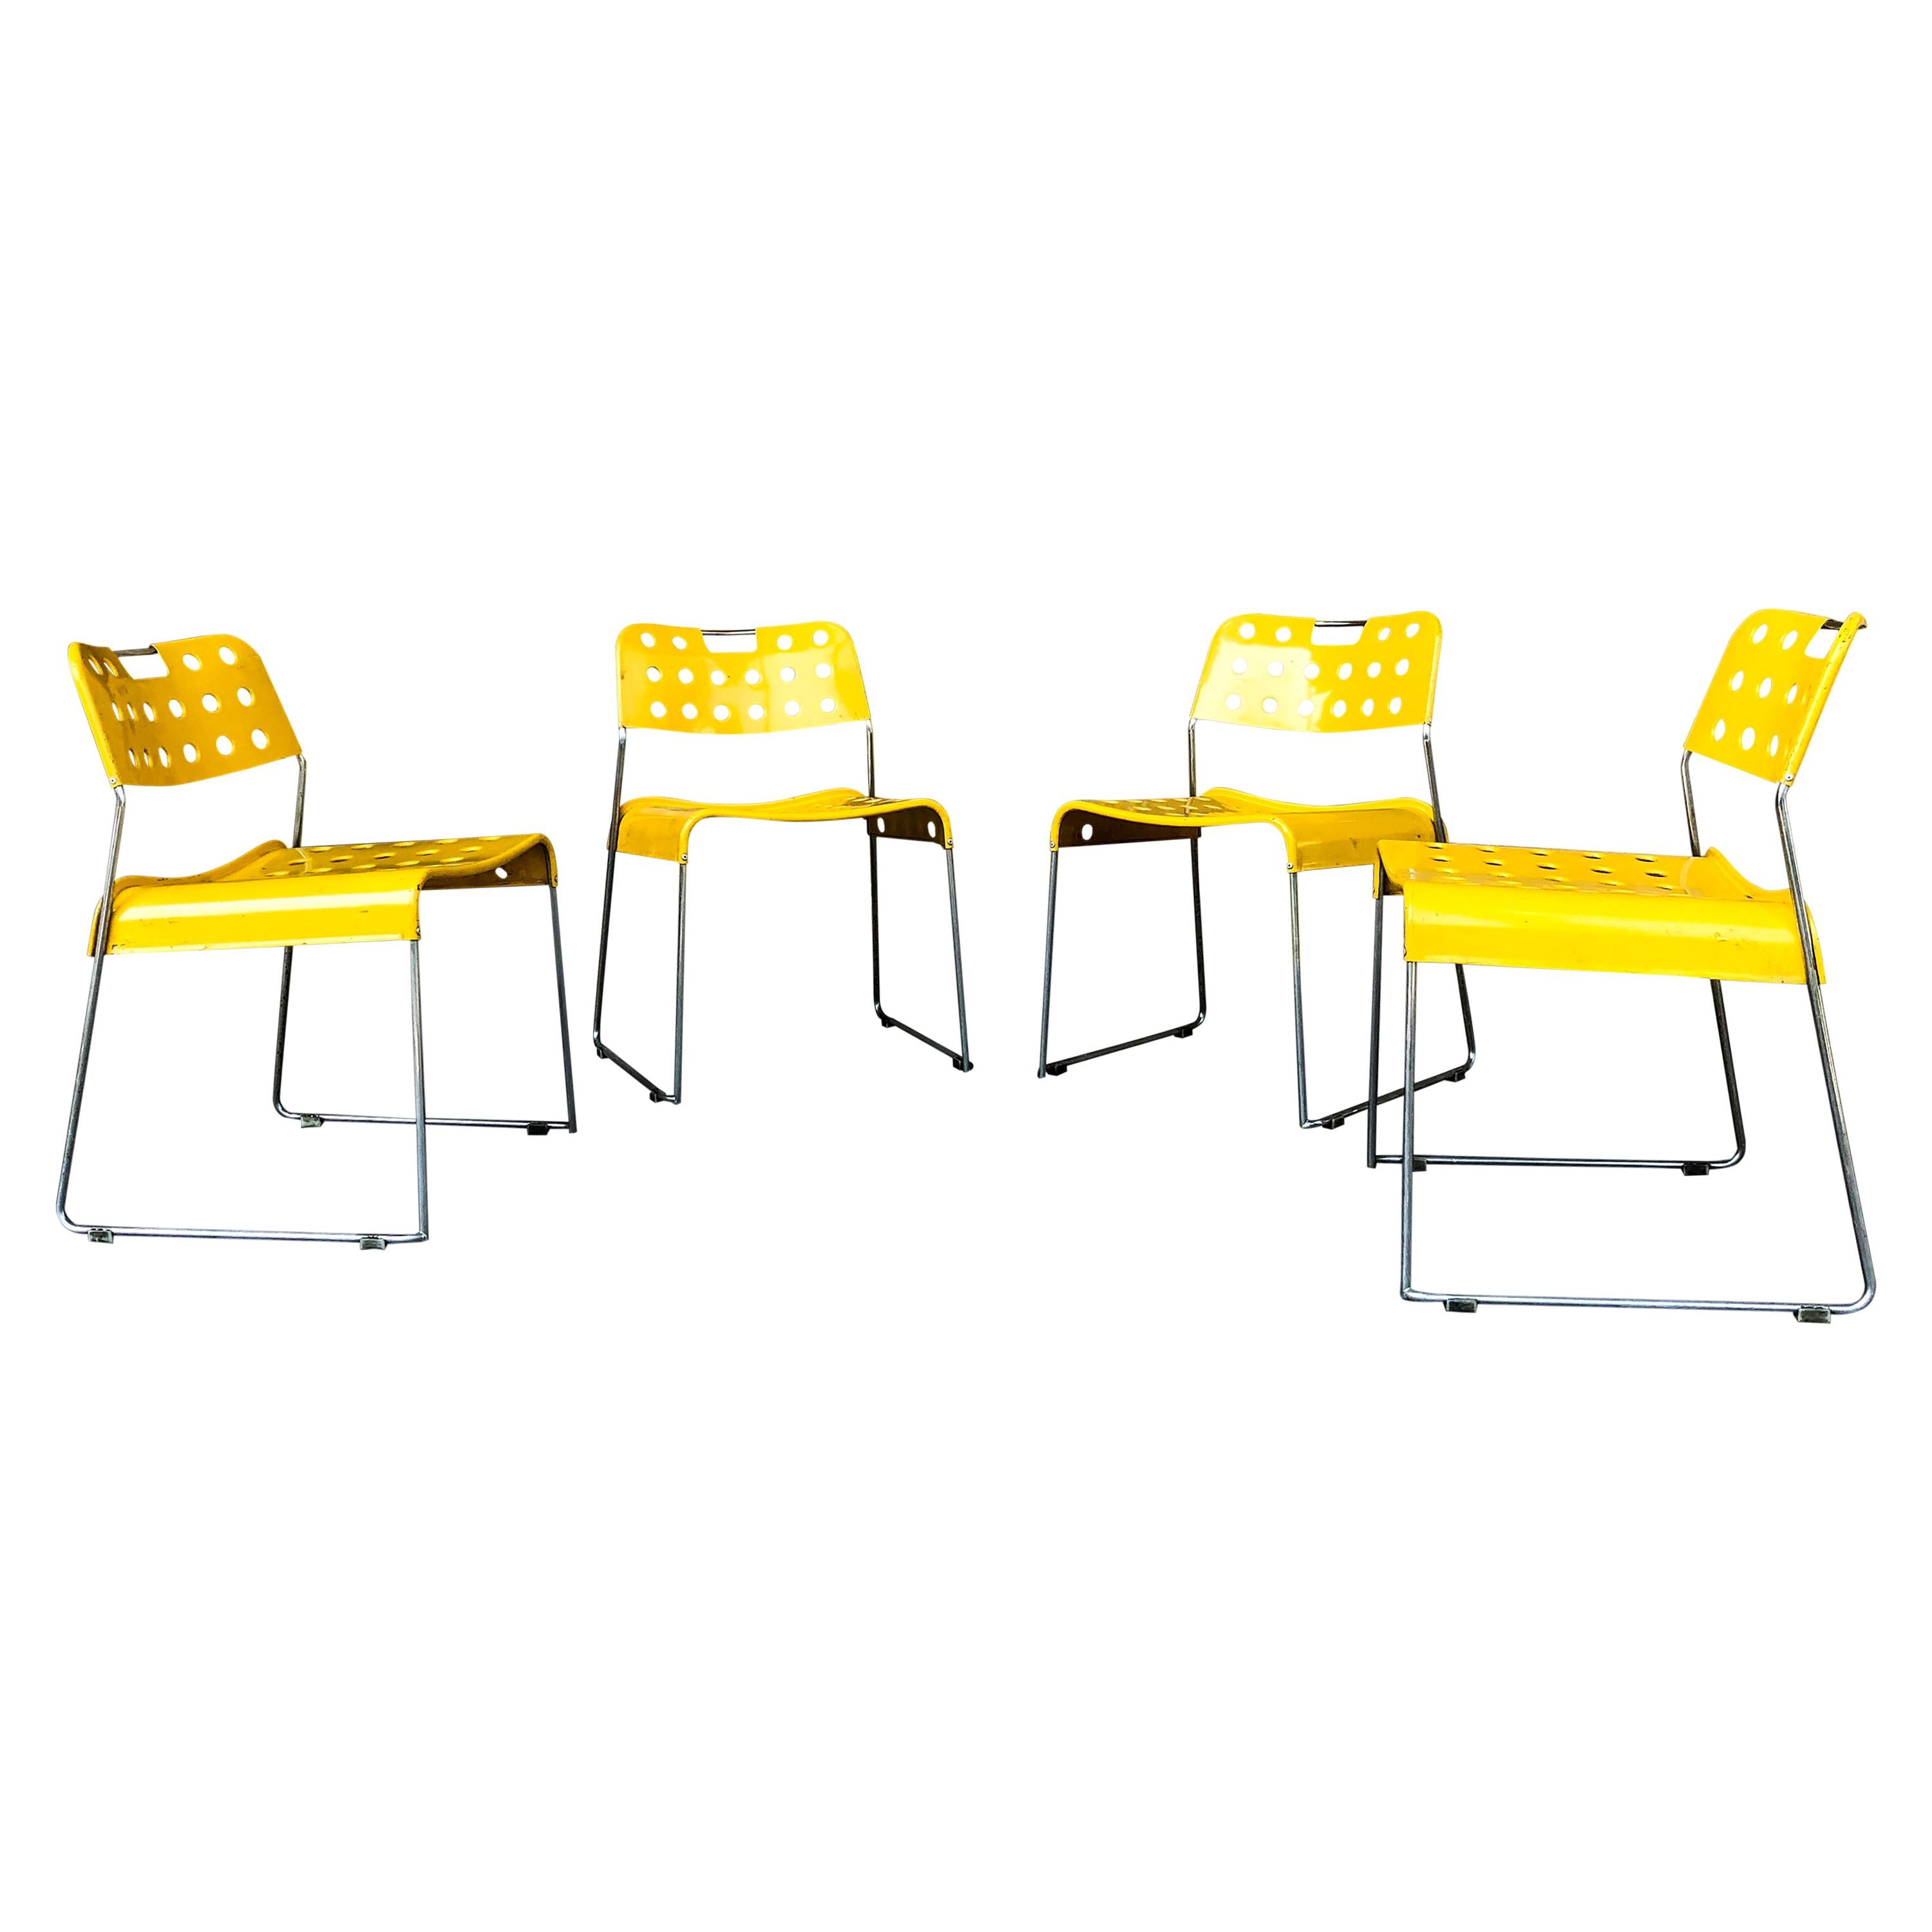 Rodney Kinsman Space Age Yellow Omstak Chair for Bieffeplast, 1971, Set of 8 For Sale 5